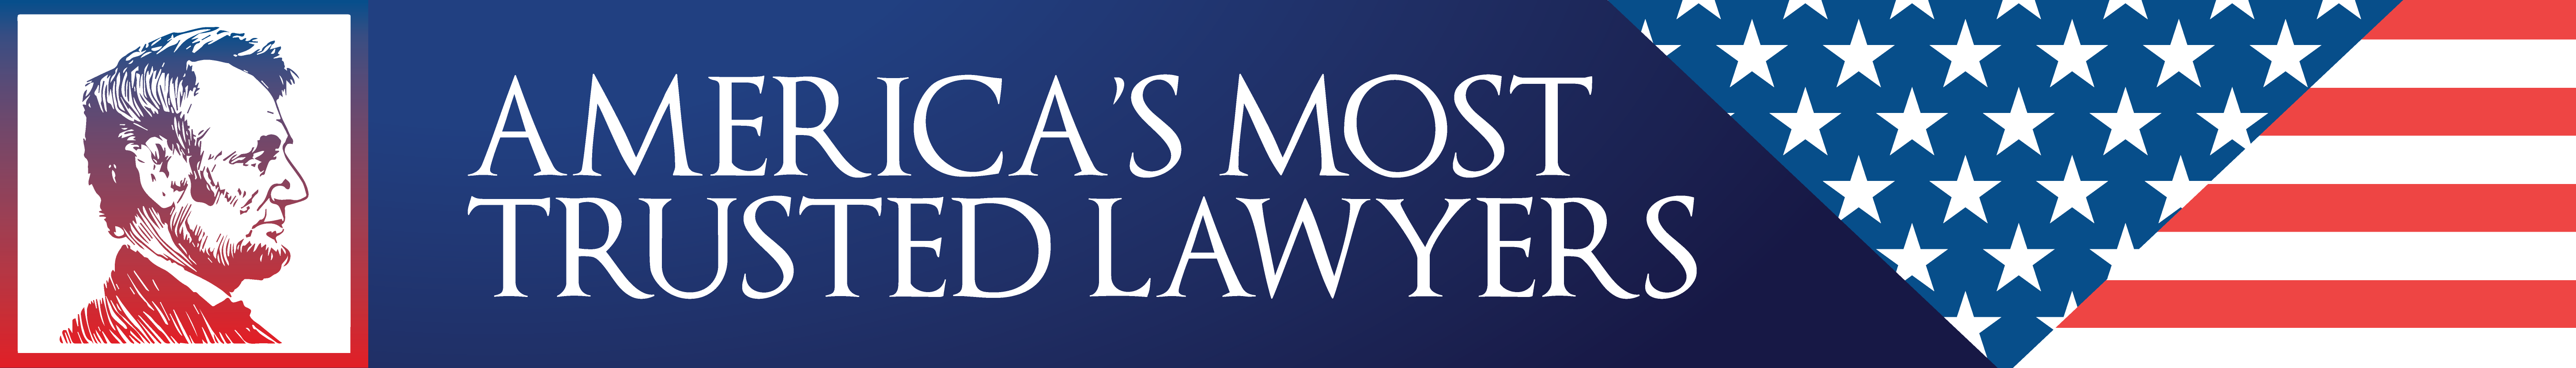 America’s Most Trusted Lawyers